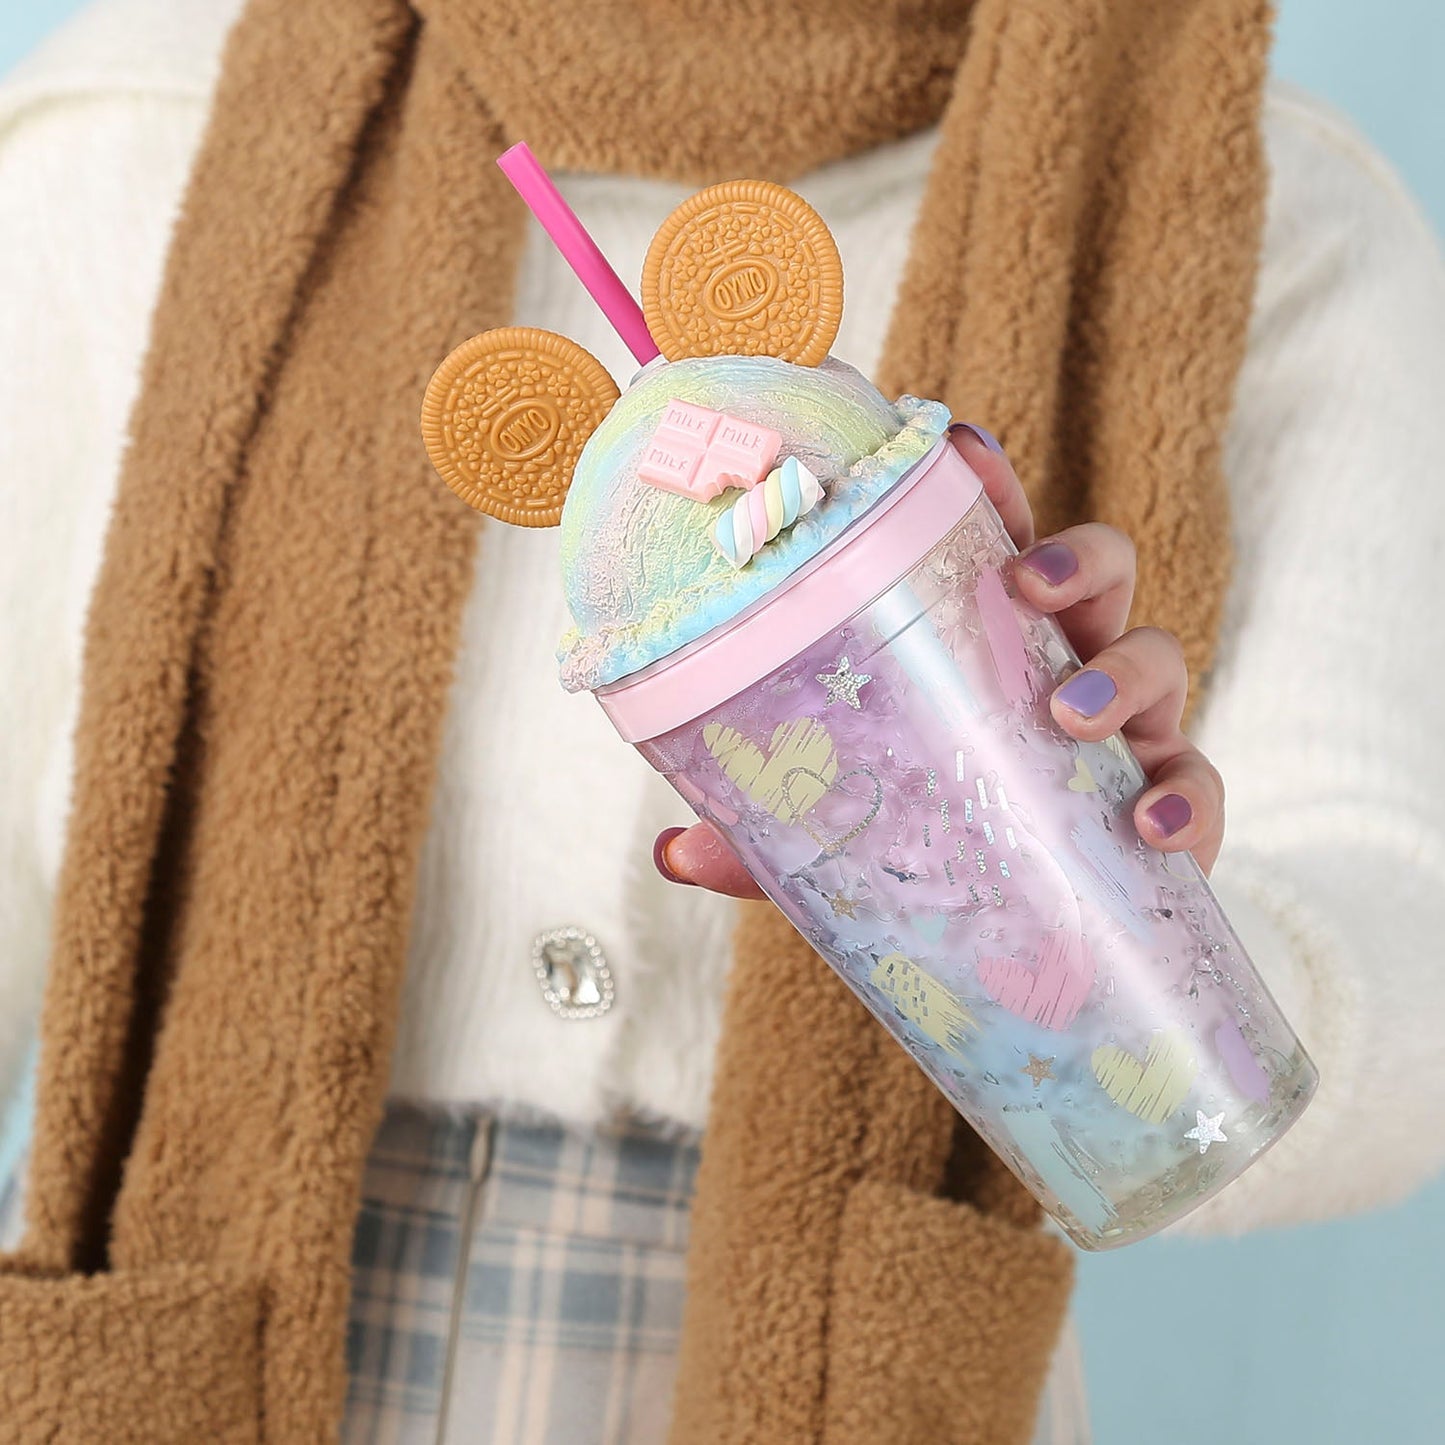 Cookie Mouse Ear Tumbler - Pink